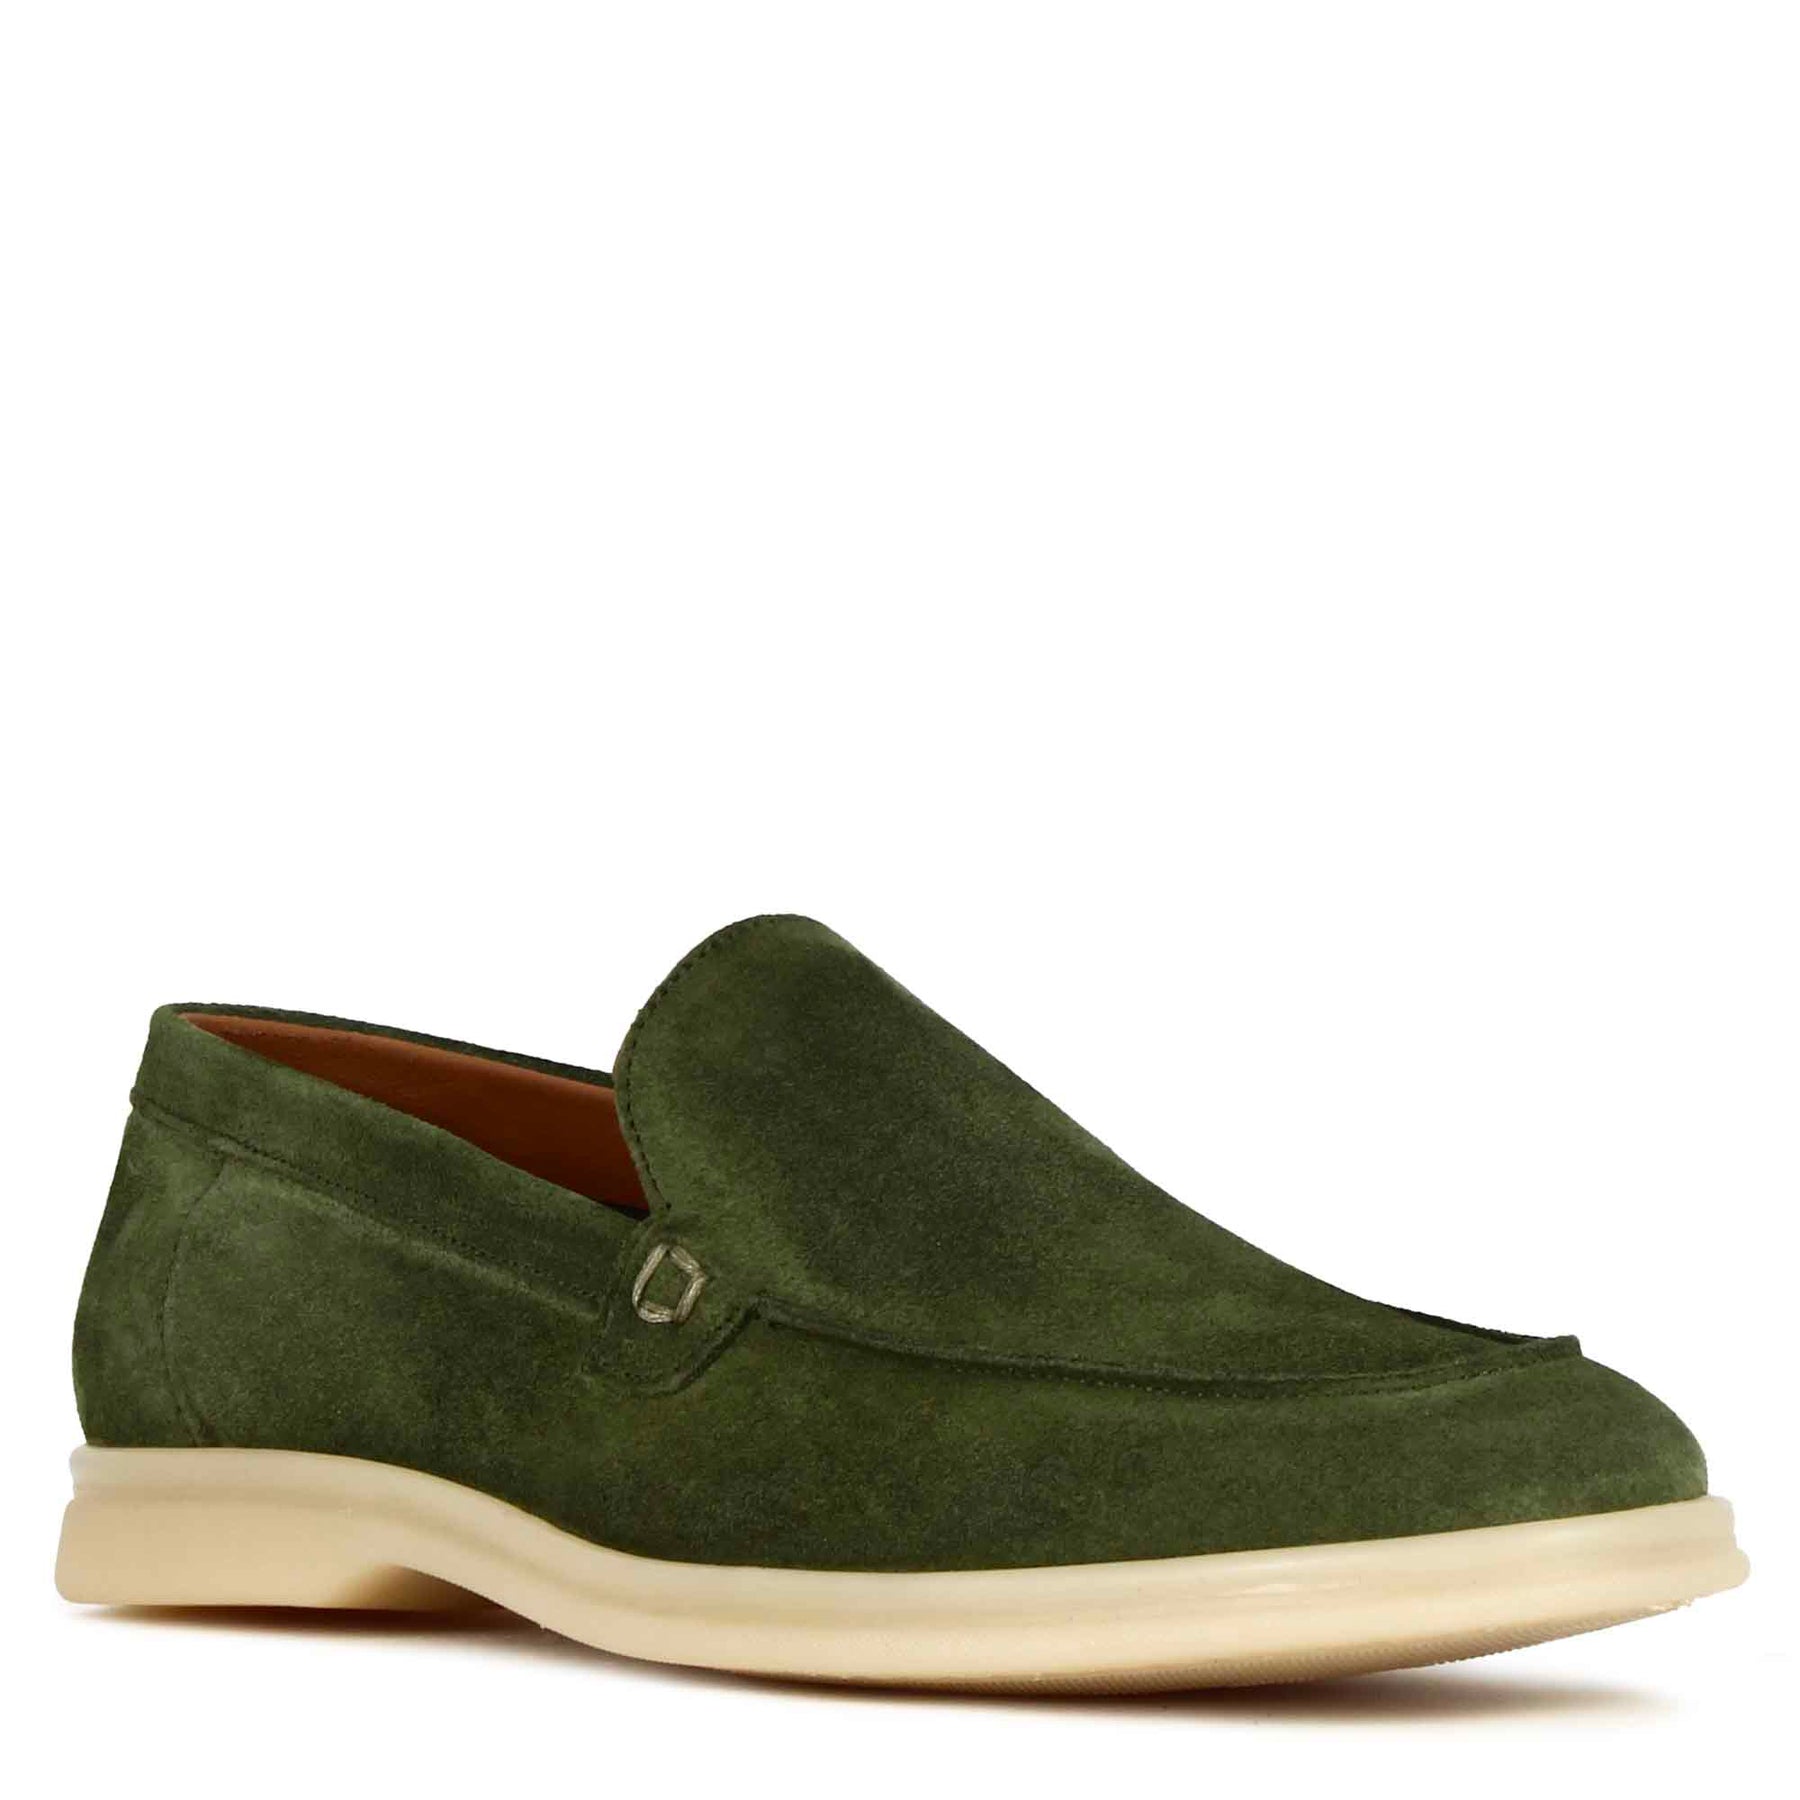 Casual men's loafer in green suede leather